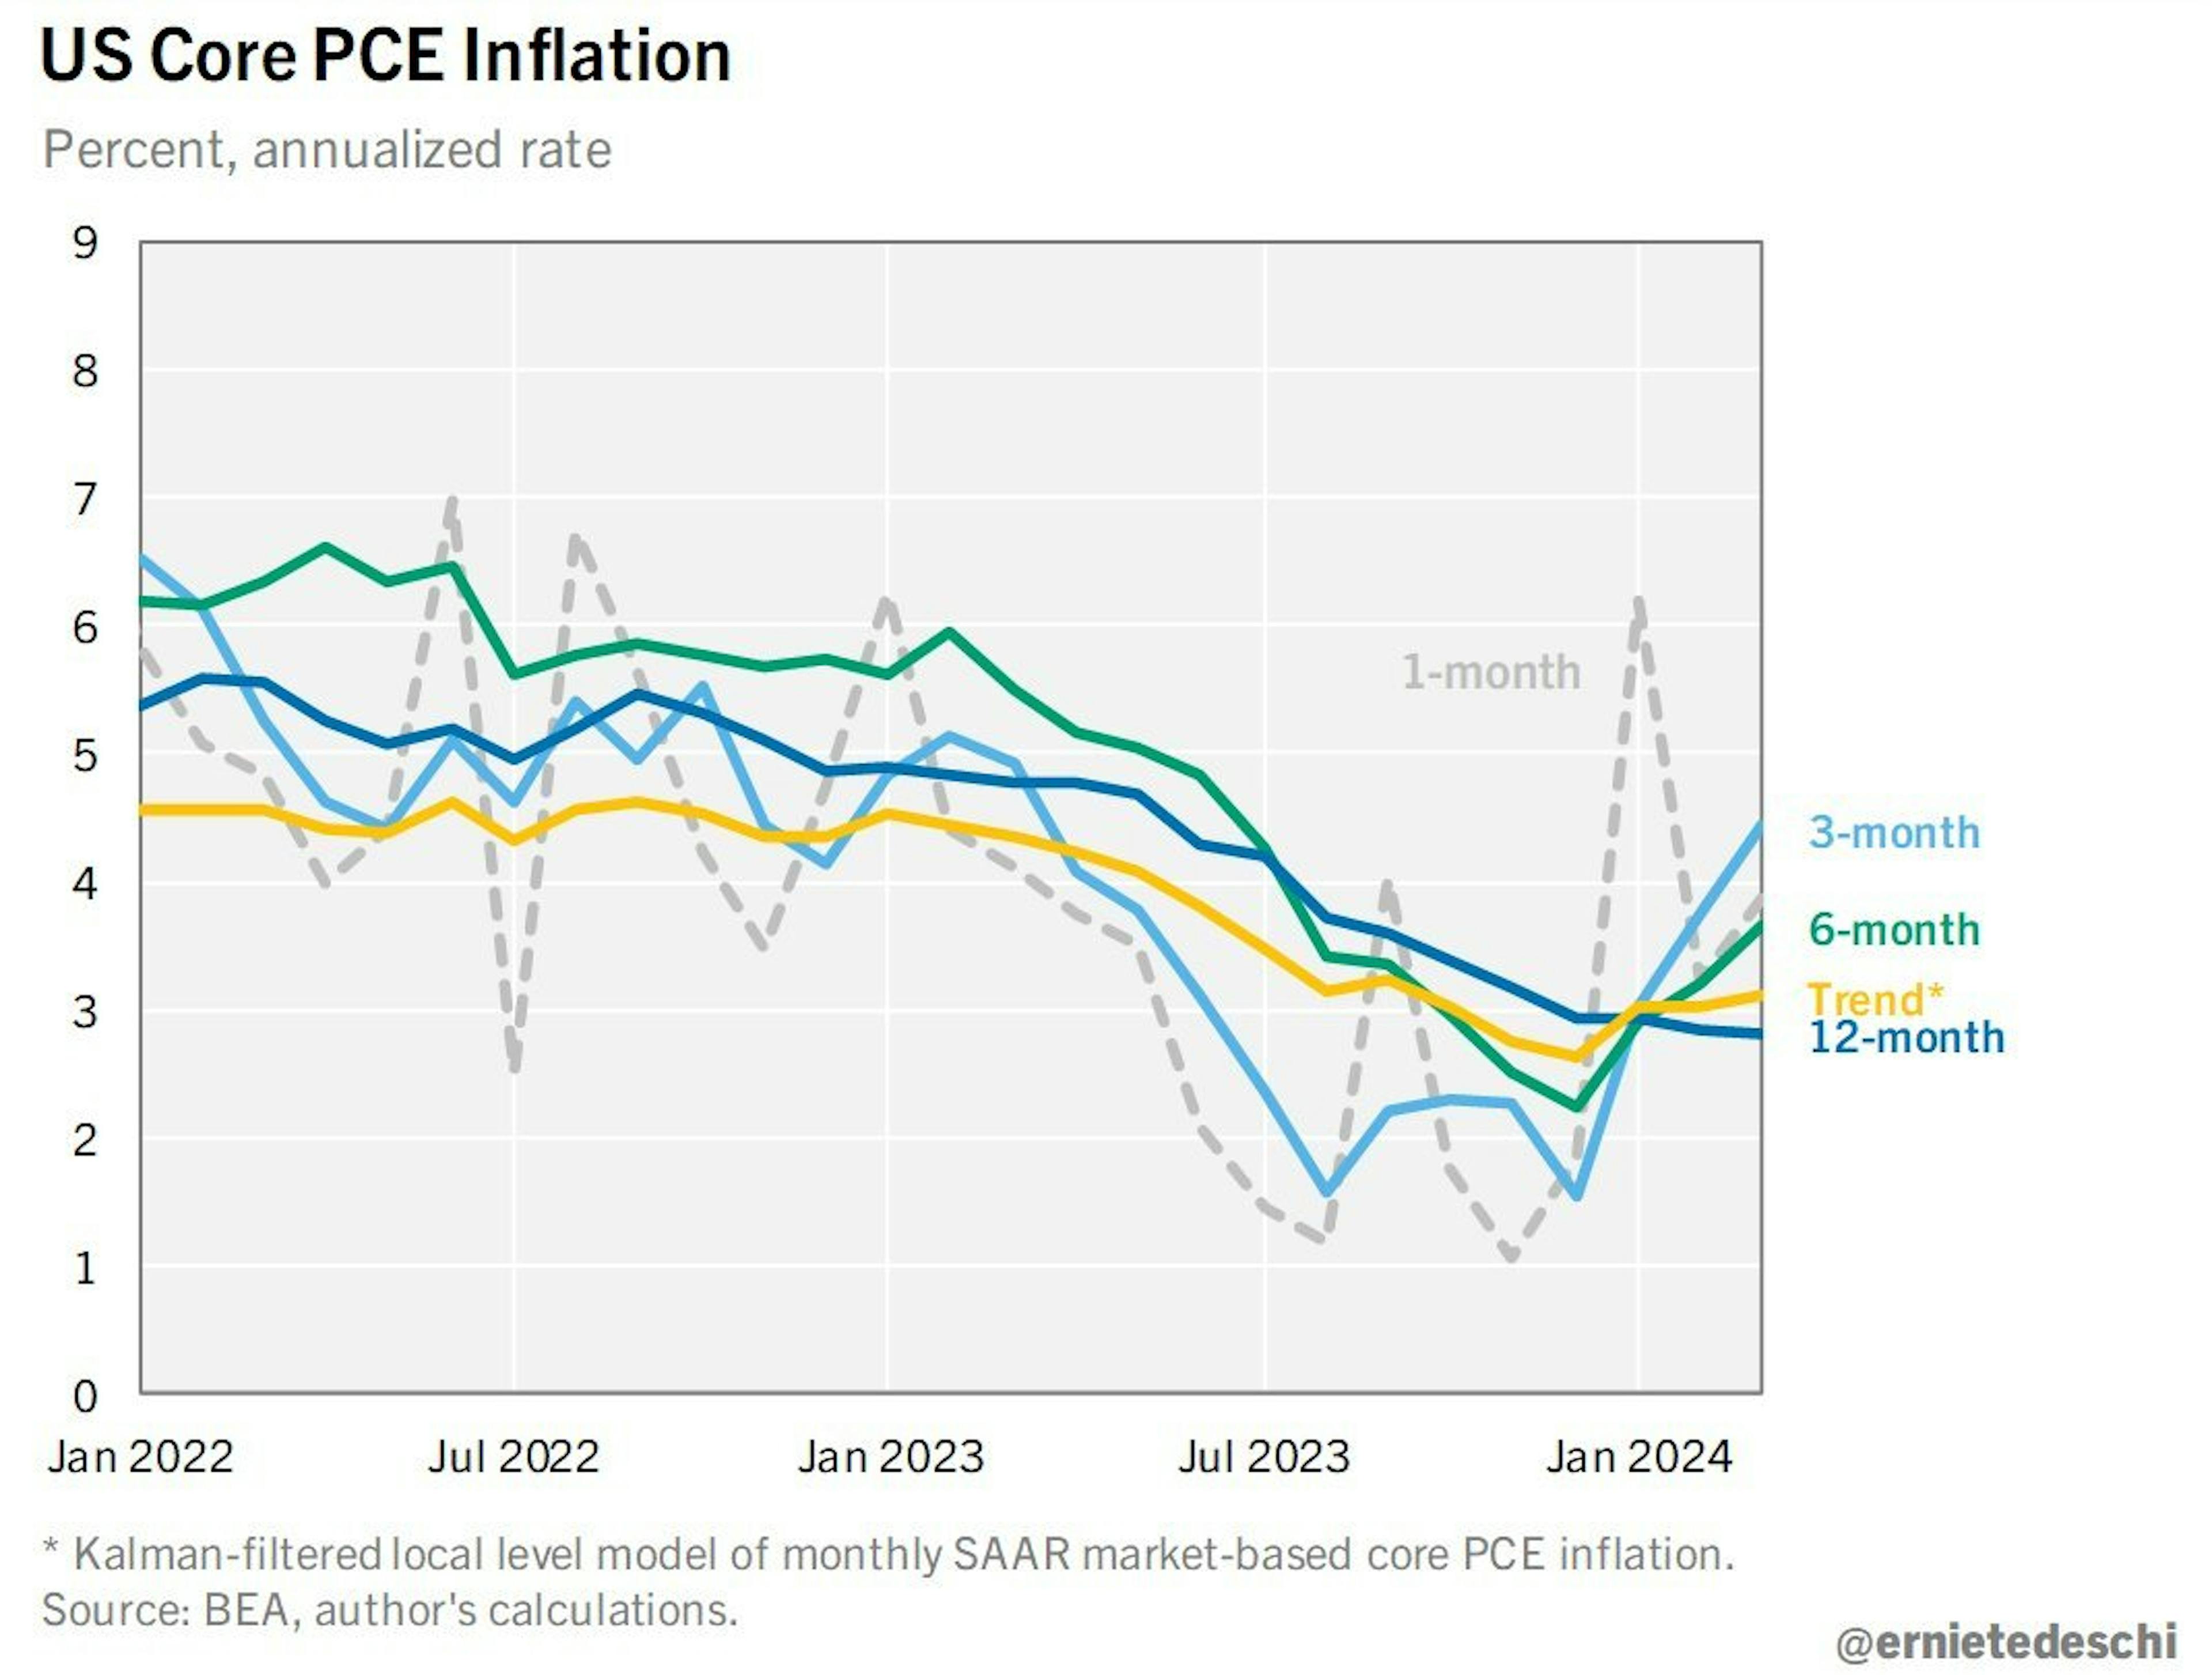 US Core PCE inflation